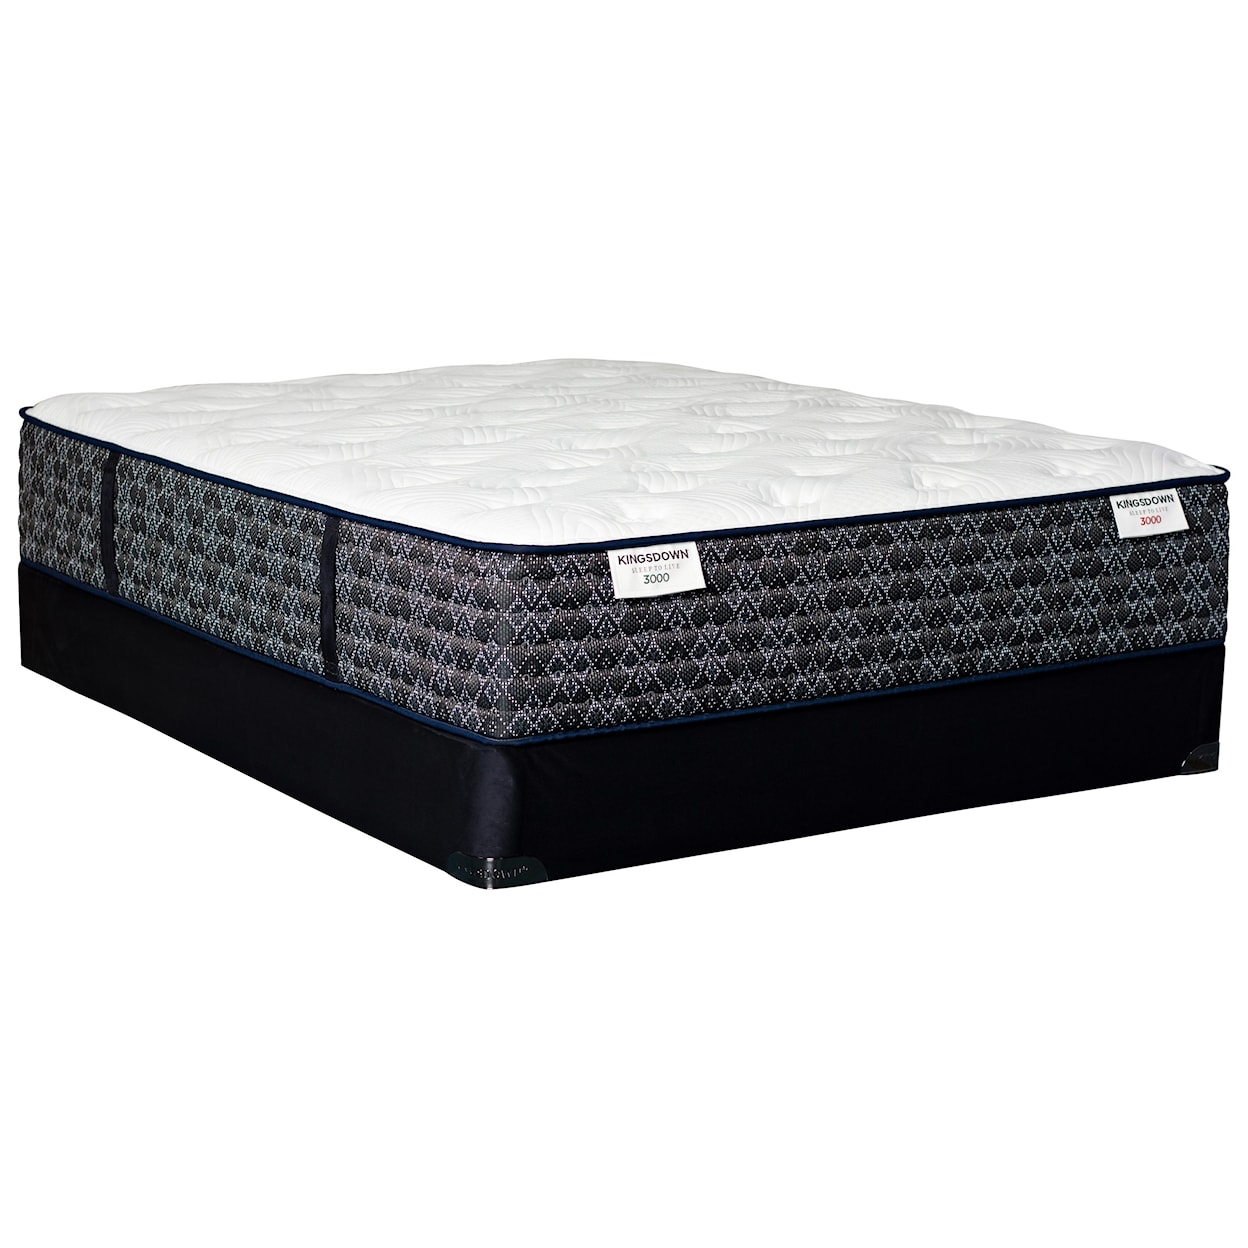 Kingsdown Sleep to Live 3000 Gold Blue Twin Pocketed Coil Mattress Set